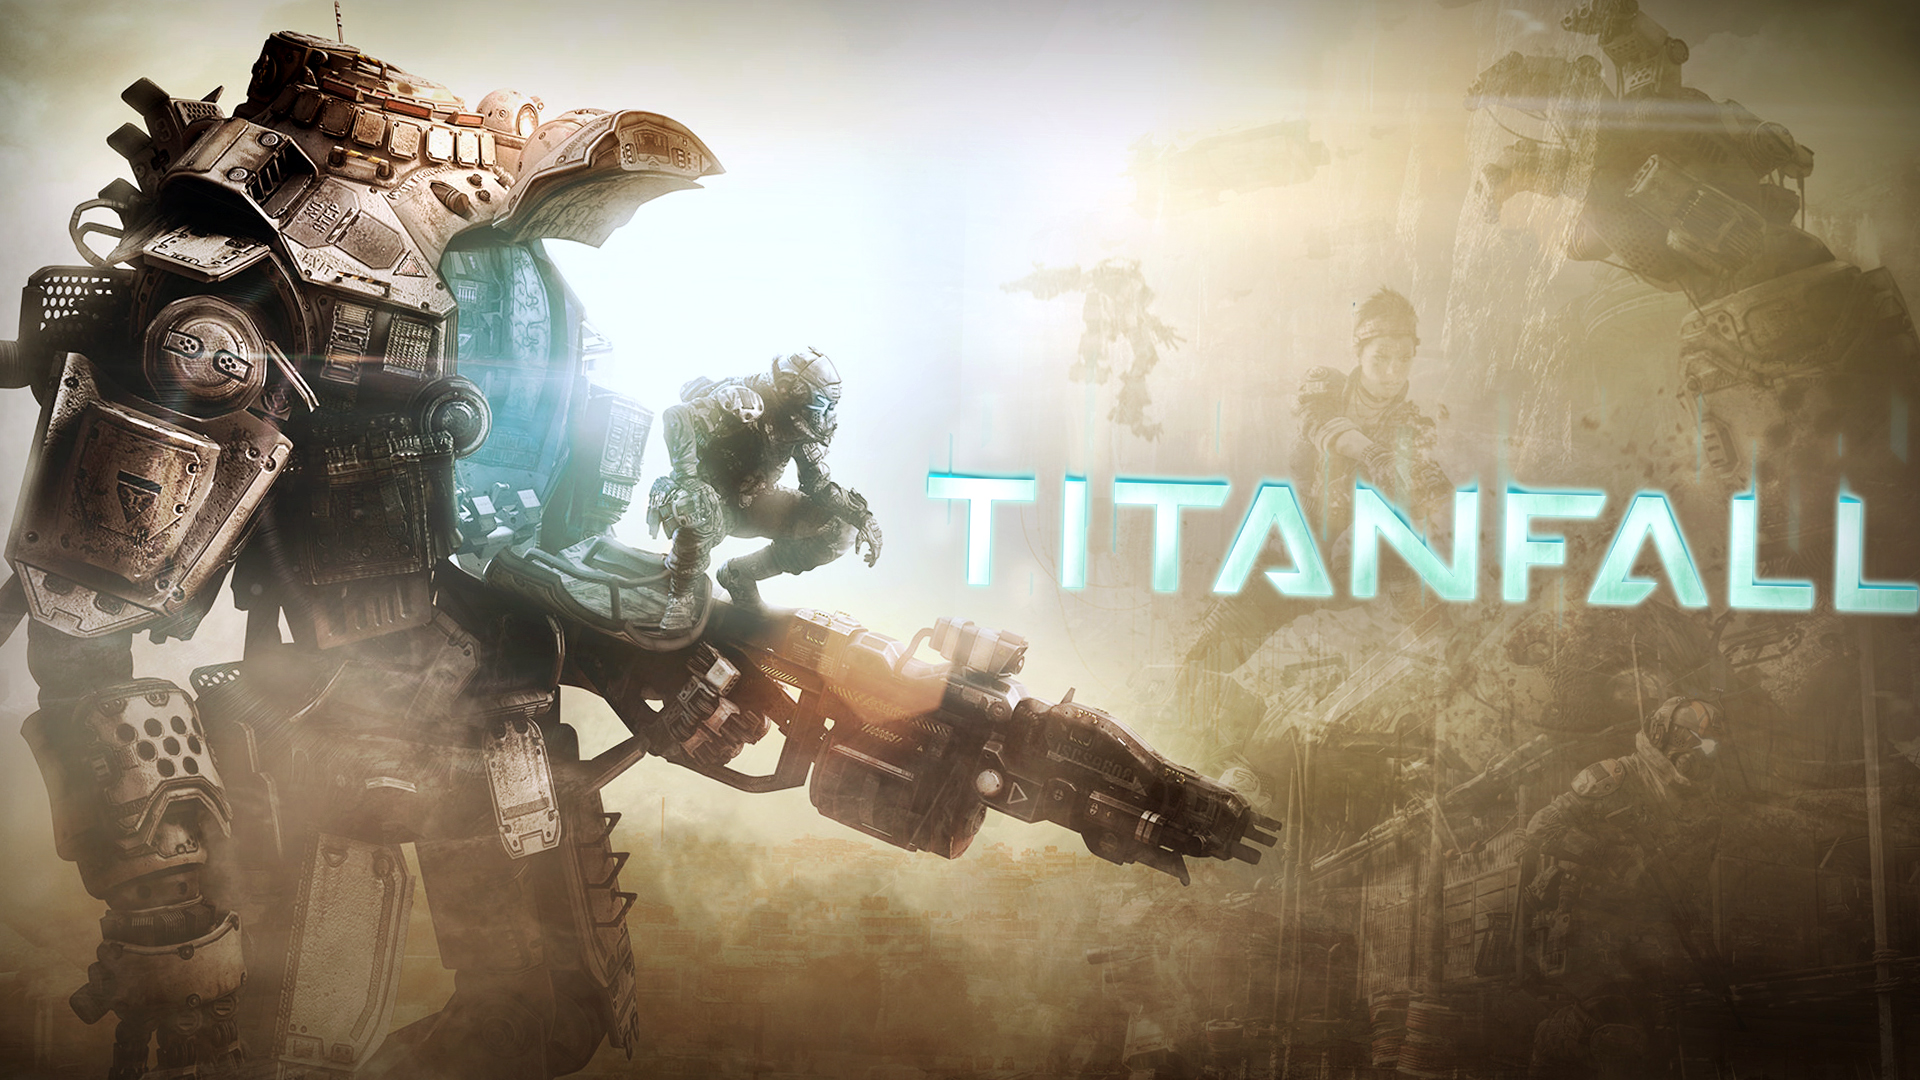 Cool Titanfall Game Cover Wallpaper